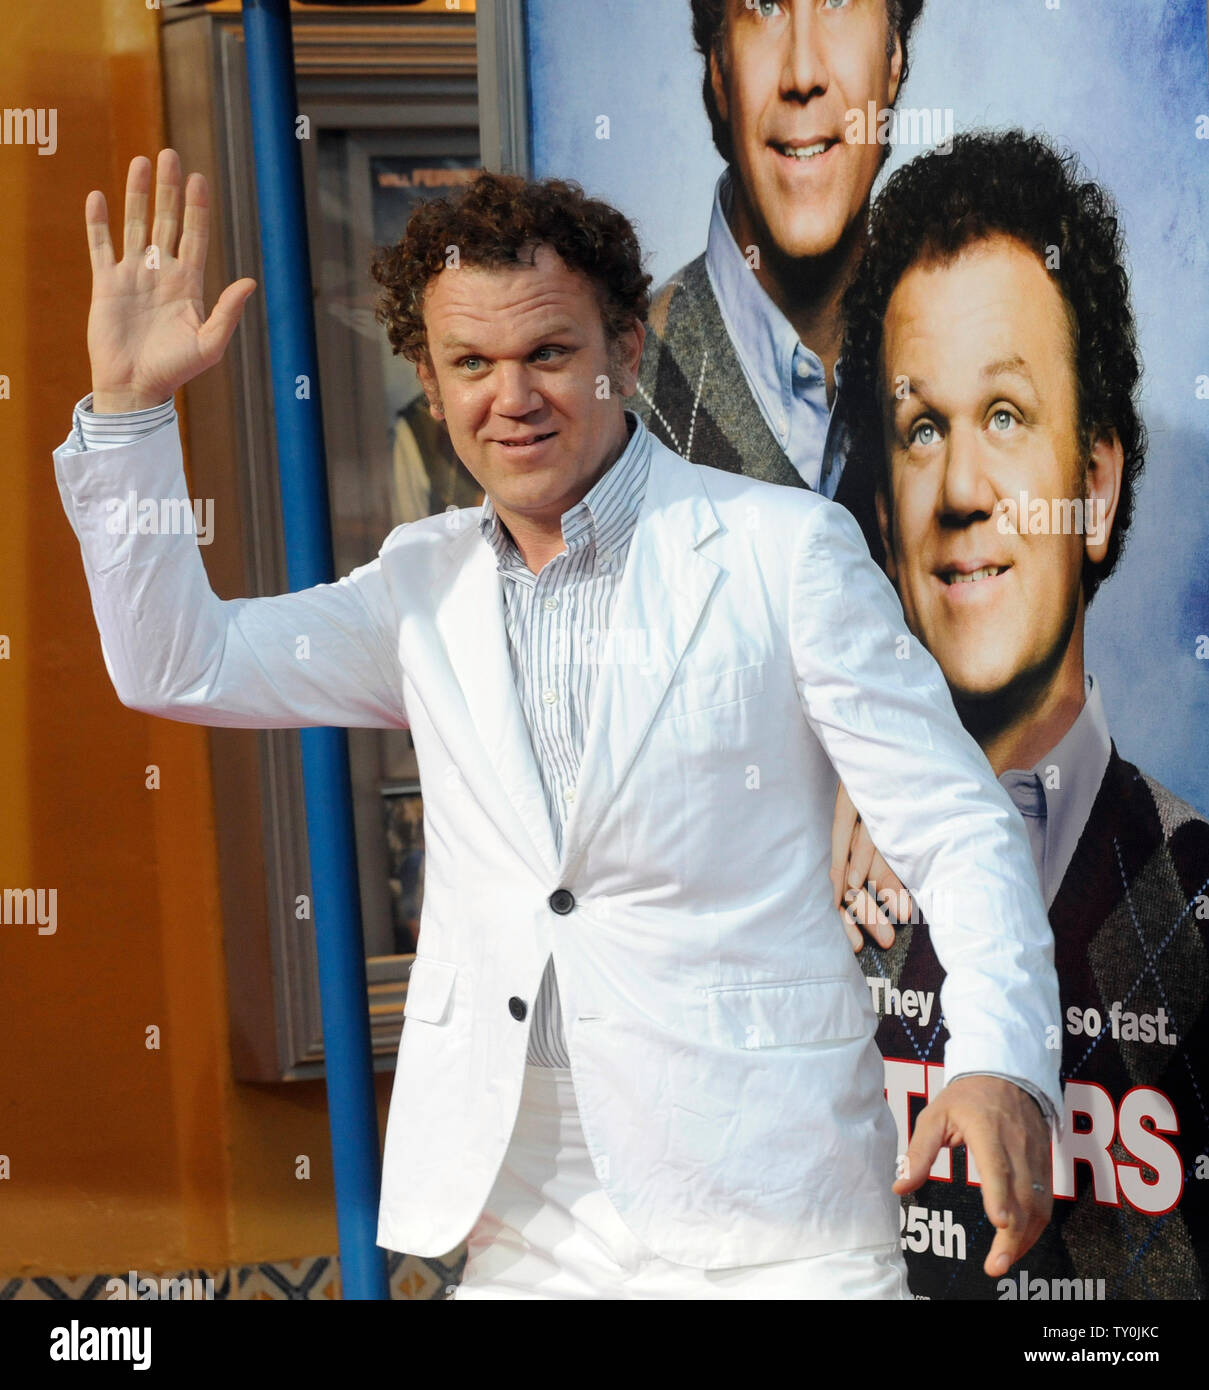 John C. Reilly, a cast member in the motion picture comedy "Step Brothers", attends the of the film Los Angeles on July 2008. (UPI Photo/Jim Ruymen Stock Photo - Alamy